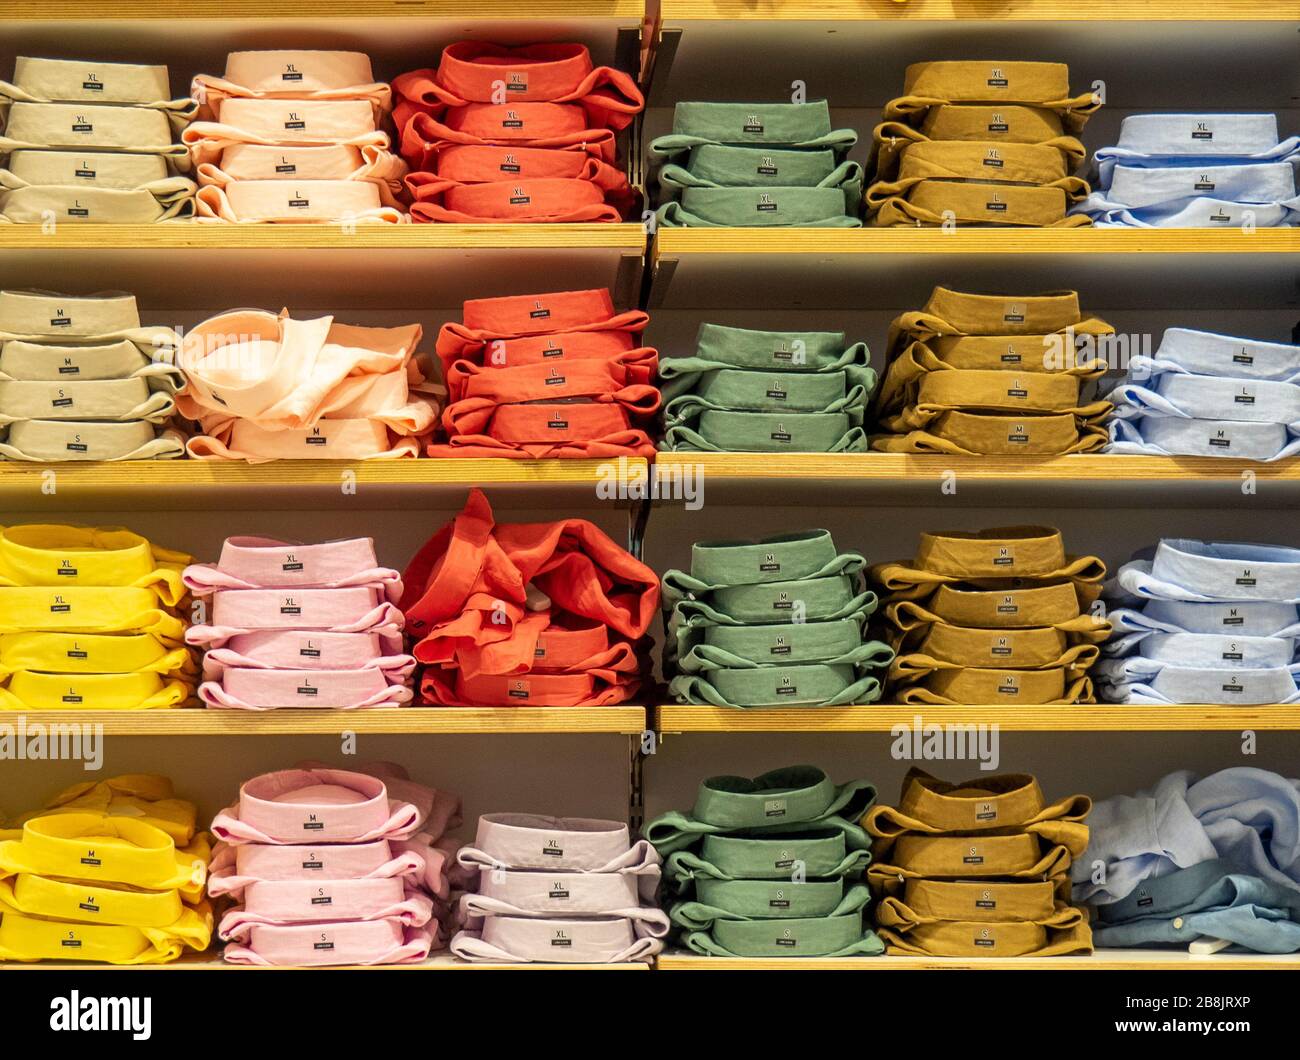 Shirts arranged by colour on display in a store. Stock Photo